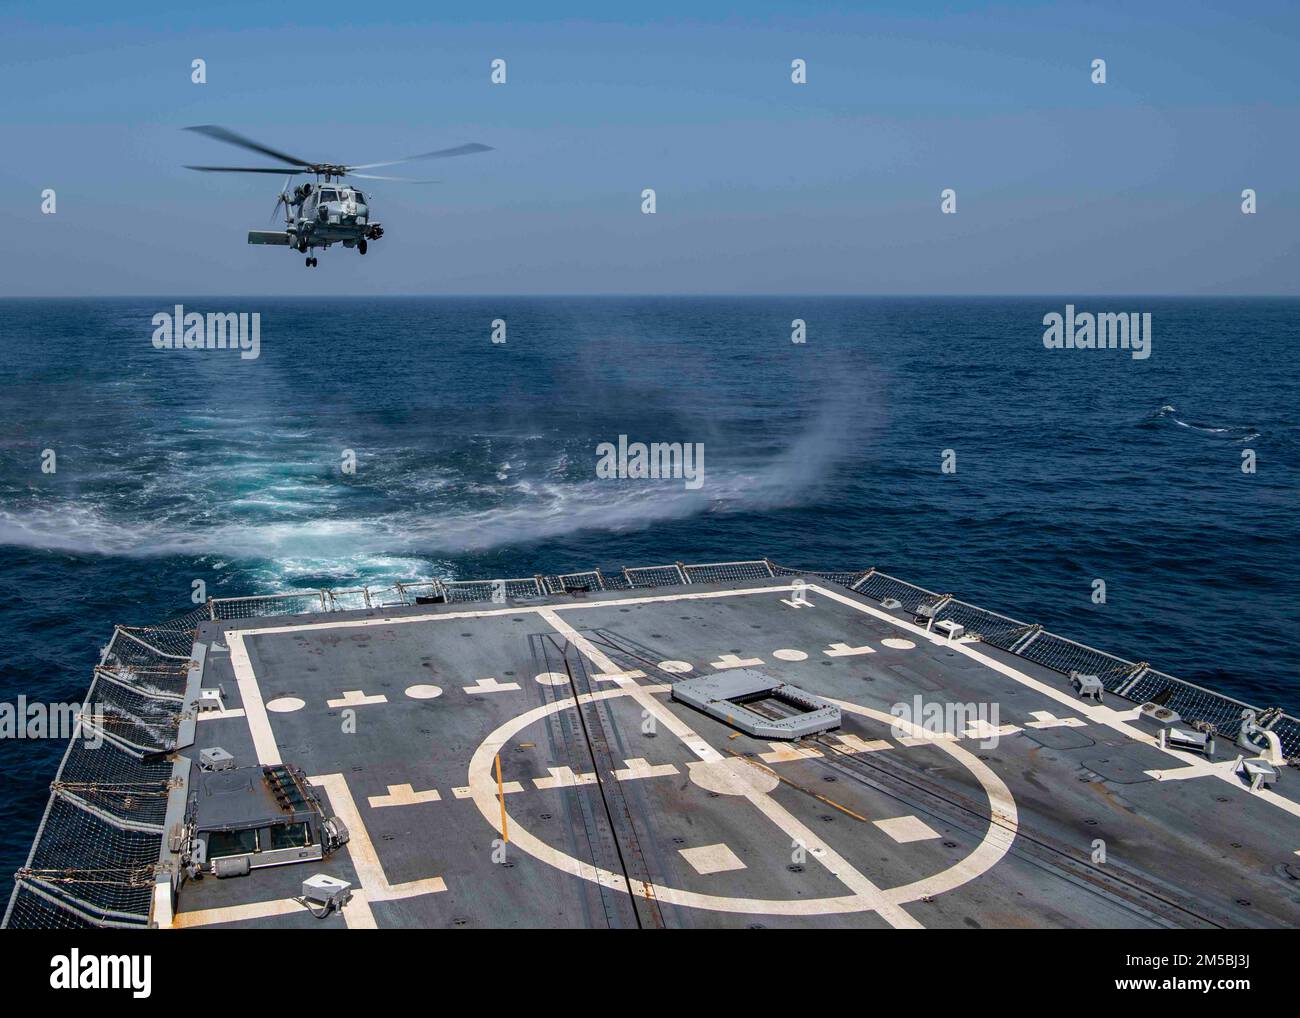 GULF OF OMAN (Feb. 23, 2022) An MH-60R Sea Hawk helicopter, attached to the “Raptors” of Helicopter Maritime Strike Squadron (HSM) 71, approaches the flight deck of guided-missile destroyer USS Gridley (DDG 101) in the Gulf of Oman, Feb. 23. Gridley is deployed to the U.S. 5th Fleet area of operations in support of naval operations to ensure maritime stability and security in the Central Region, connecting the Mediterranean and Pacific through the Western Indian Ocean and three strategic choke points. Stock Photo